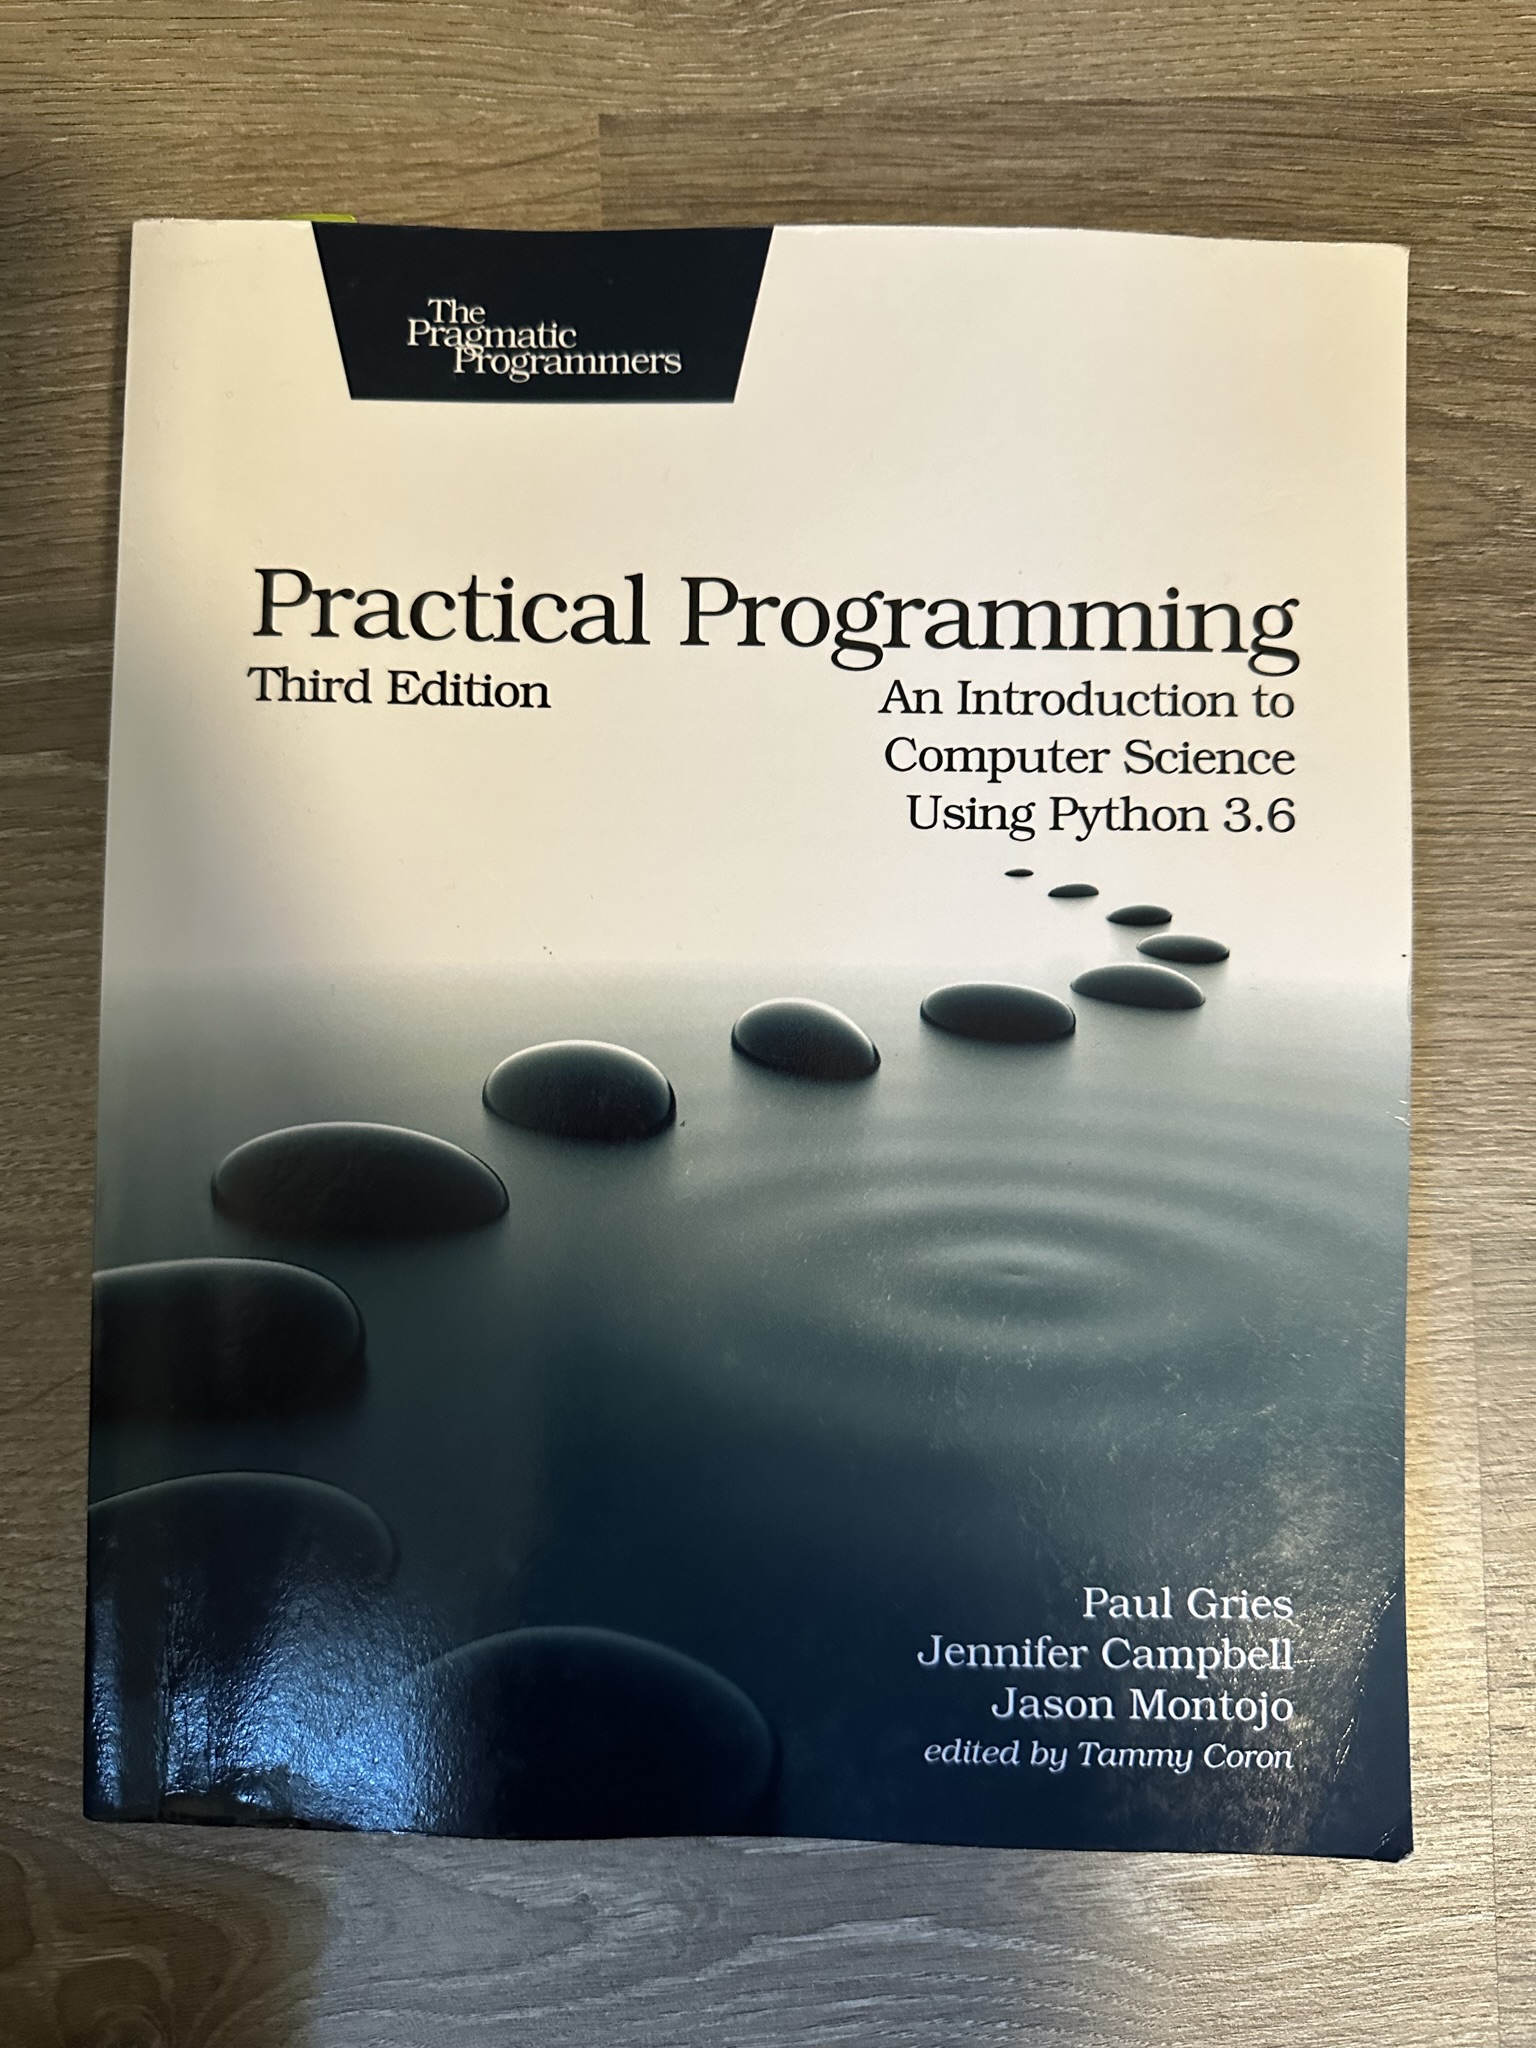 Practical Programming, Third Edition: An Introduction to Computer Science  Using Python 3.6 by Paul Gries, Jennifer Campbell, Jason Montojo